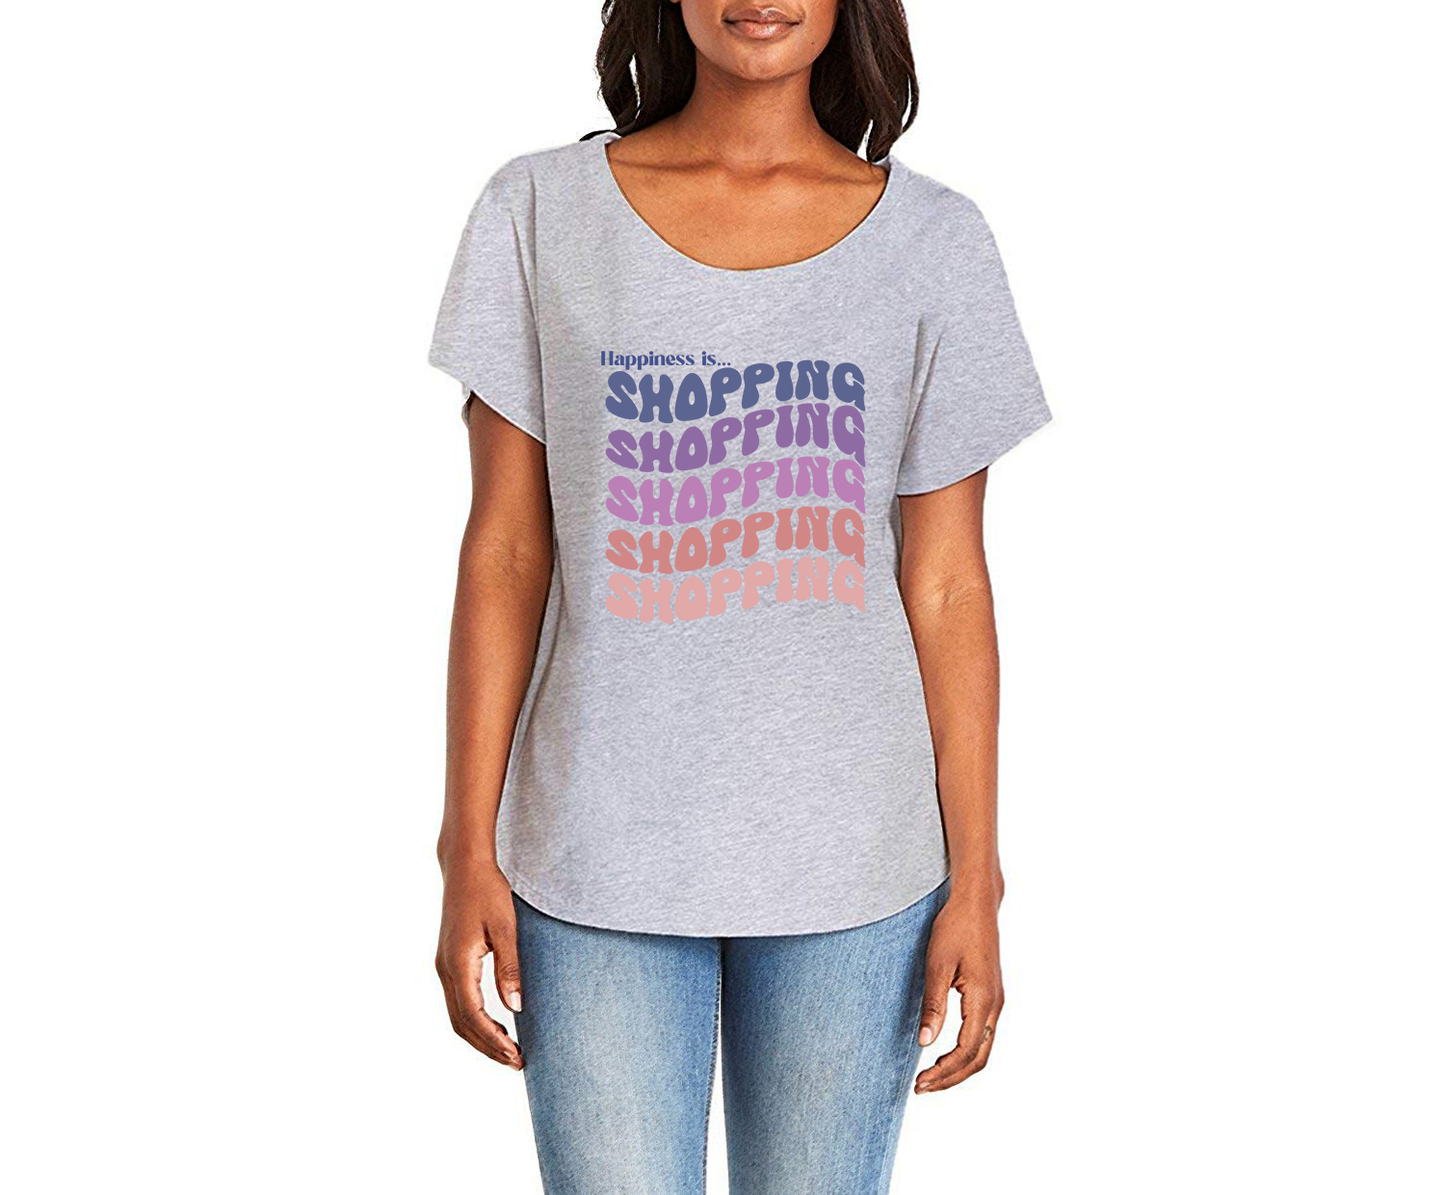 Happiness is Shopping Ladies Tee Shirt - In White & Grey